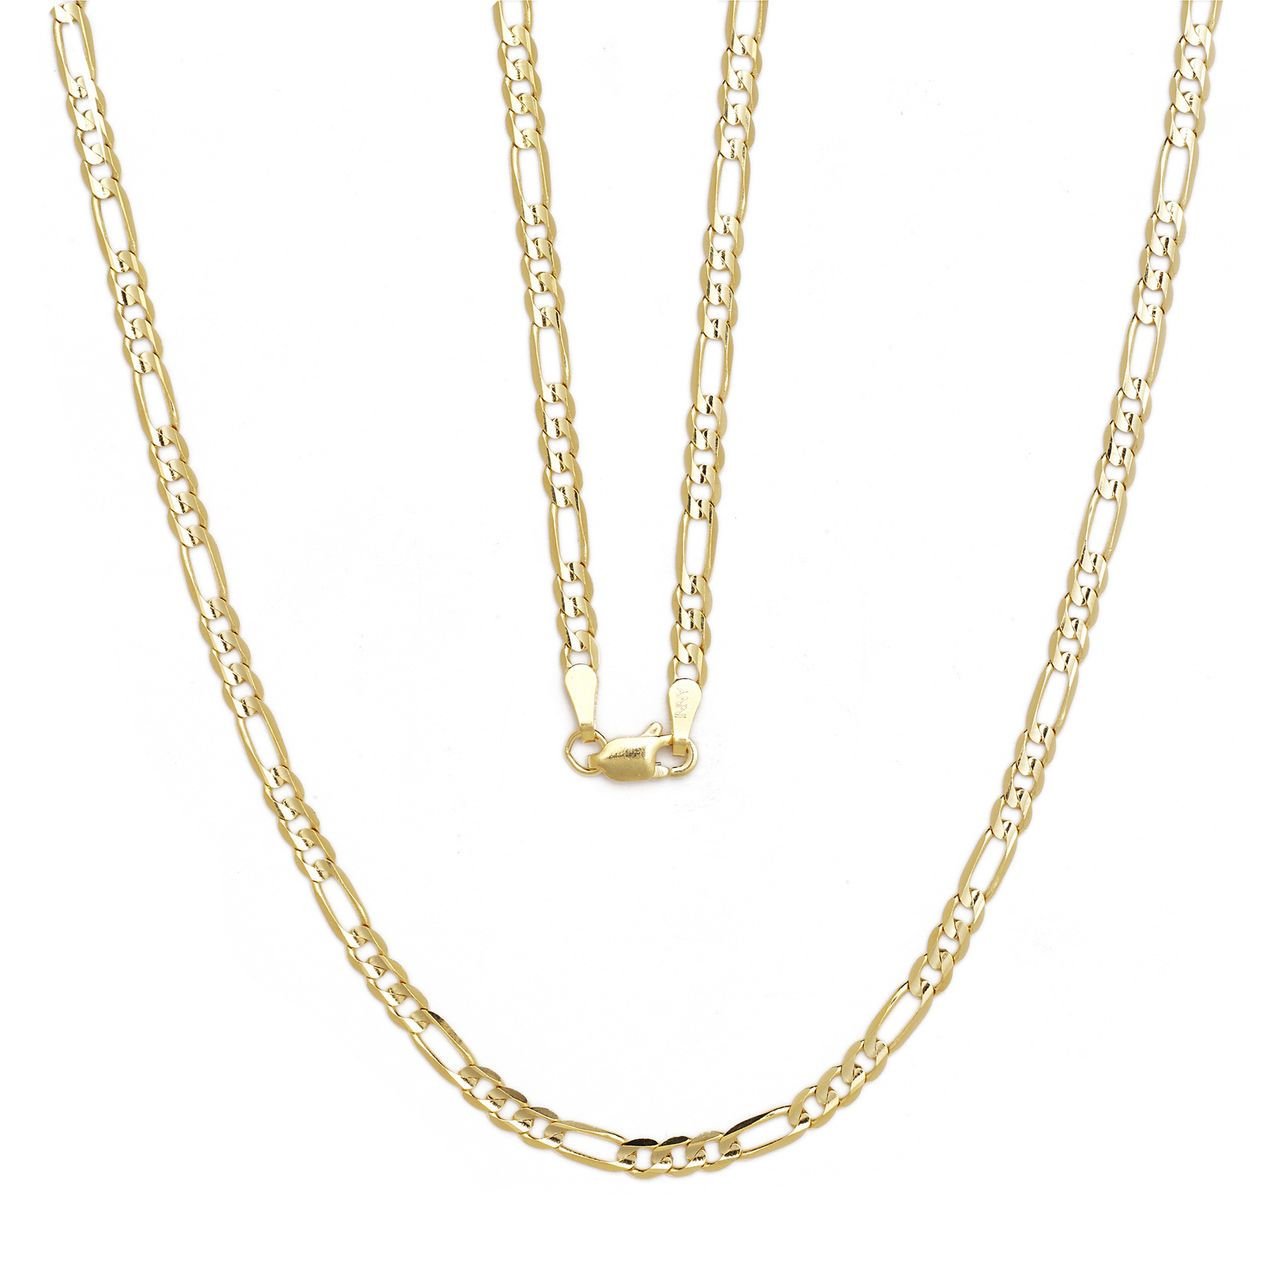 10k Yellow Gold Figaro Chain Necklace with Concave Look, 0.22 Inch (5.7mm)